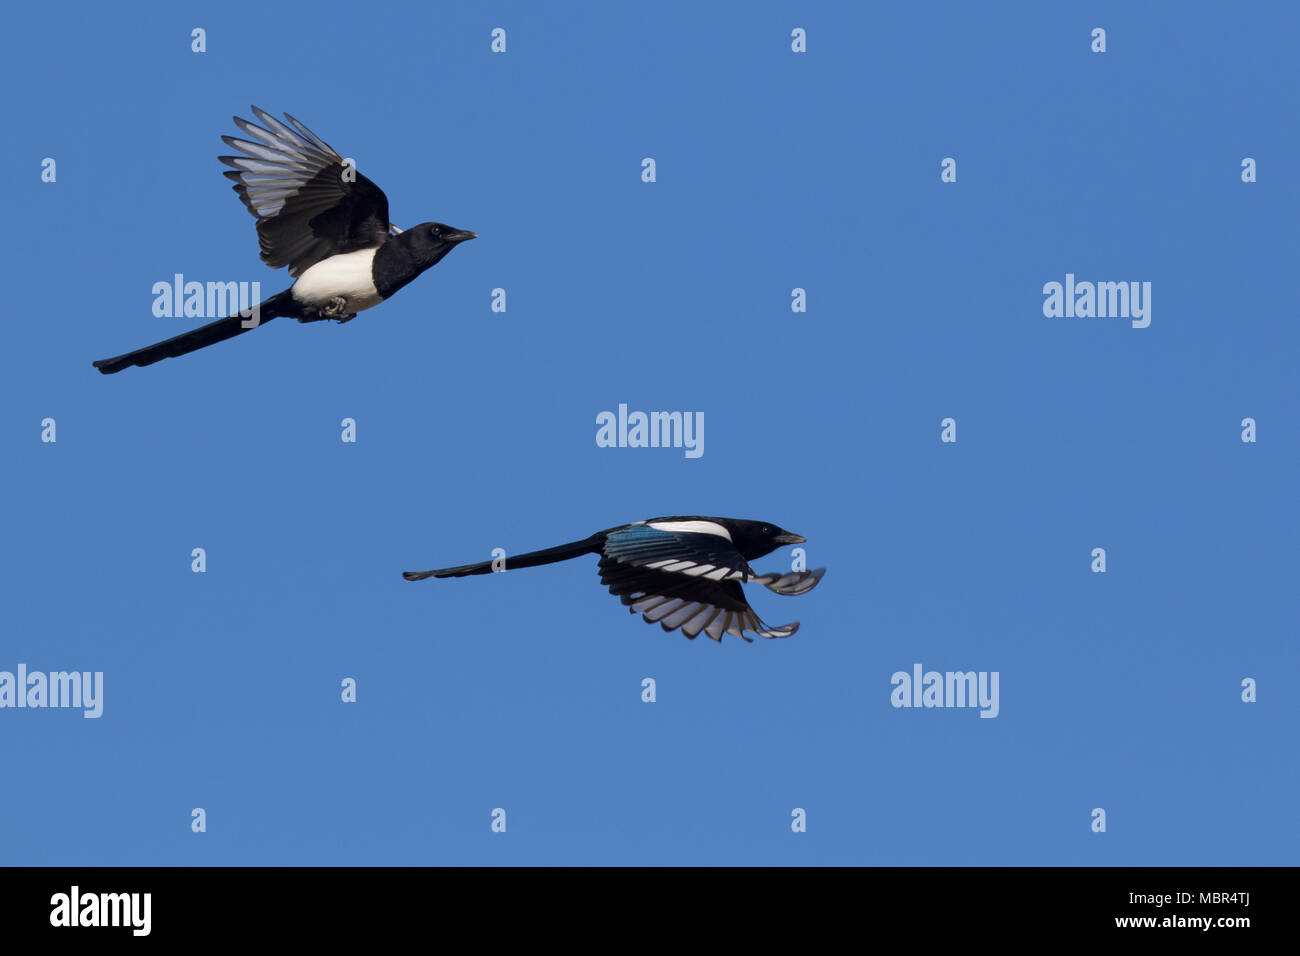 Two Eurasian magpies / common magpie (Pica pica) in flight against blue sky Stock Photo